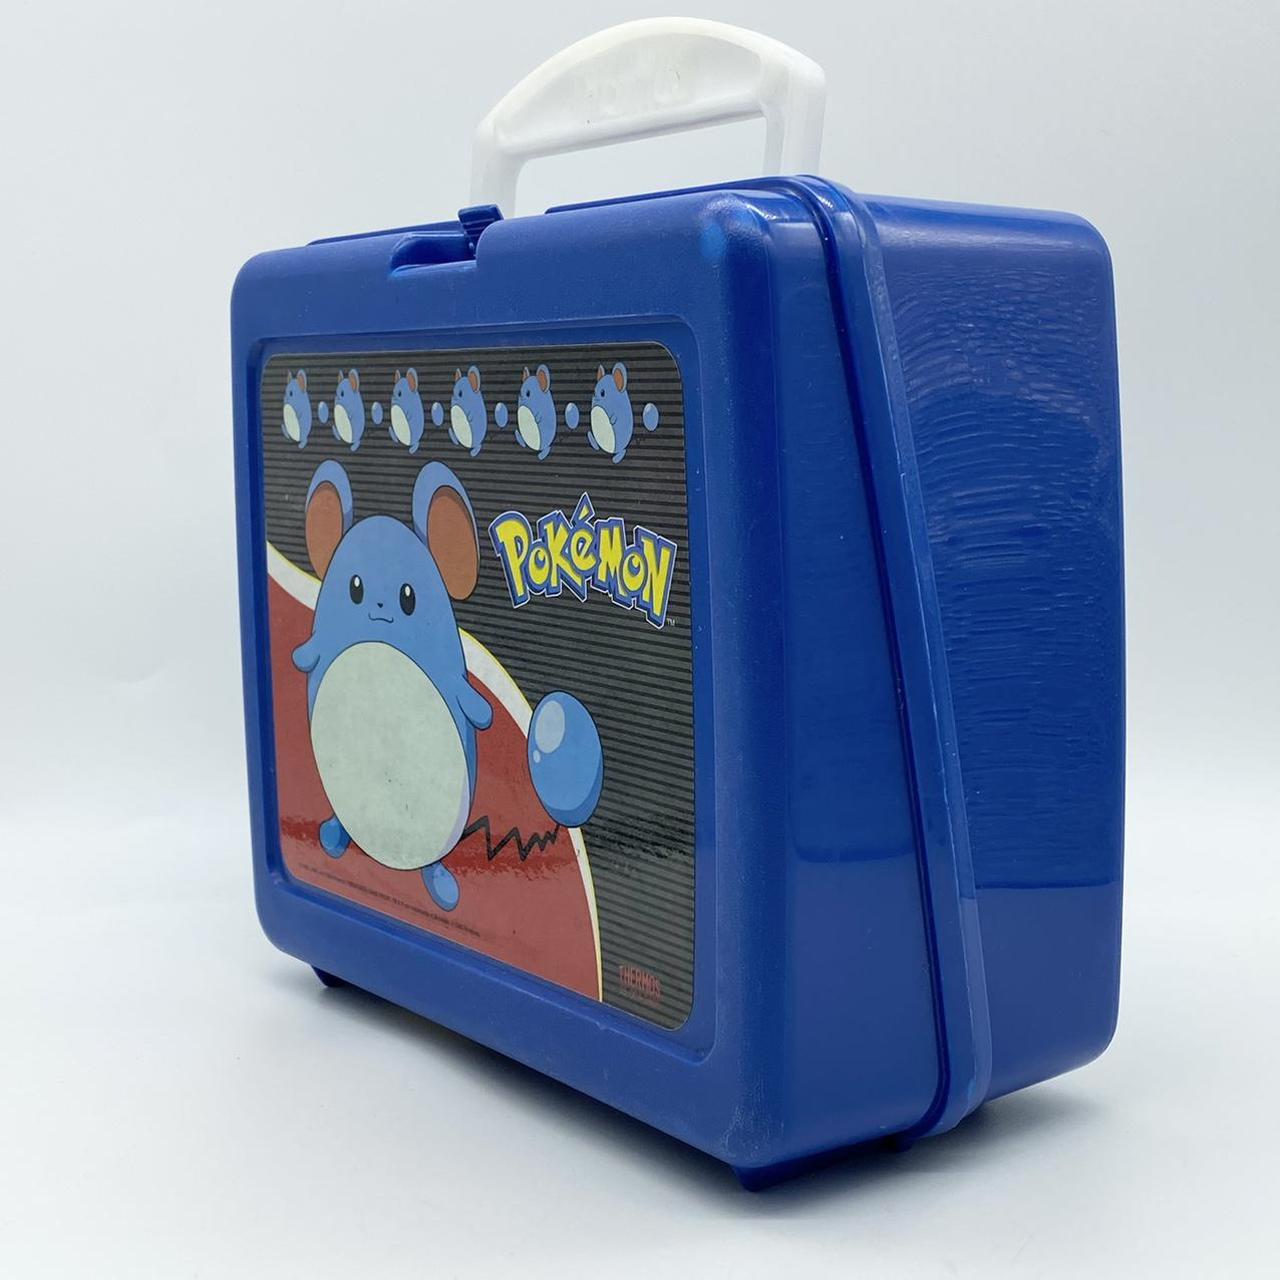 Product Image 2 - For the Pokémon lover! Vintage